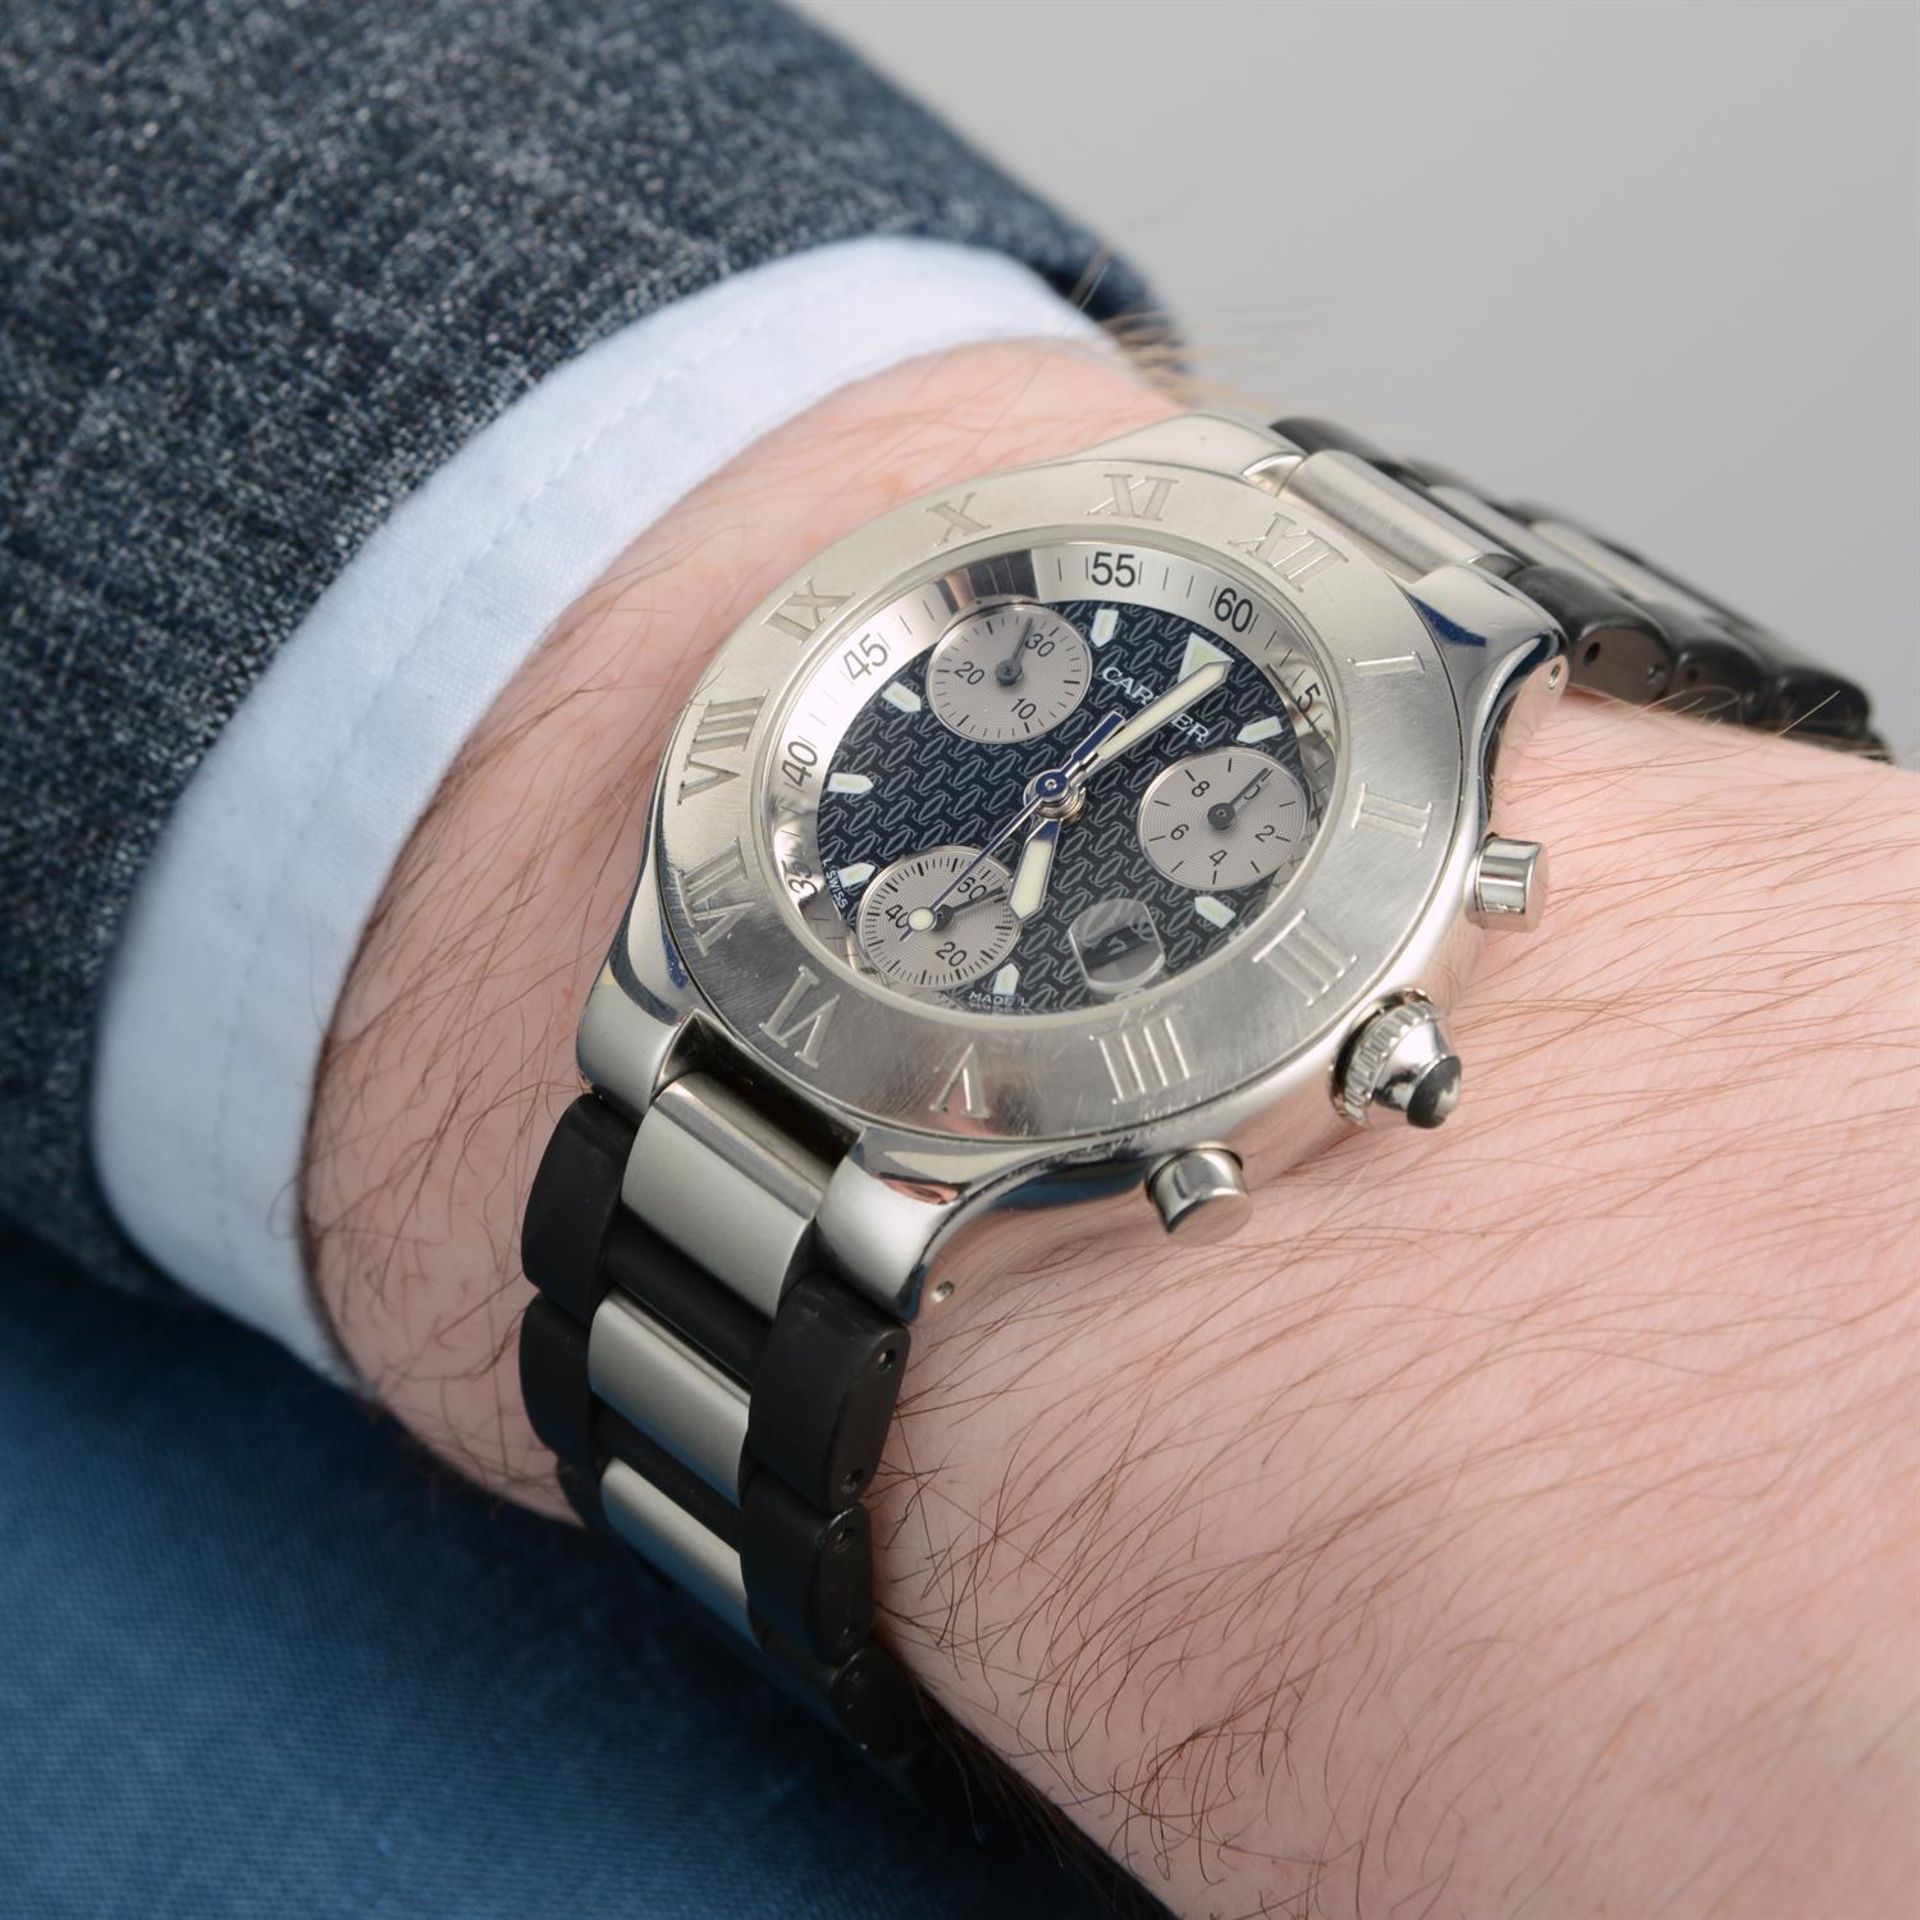 CARTIER - a stainless steel Chronoscaph 21 chronograph bracelet watch, 38mm. - Image 5 of 6